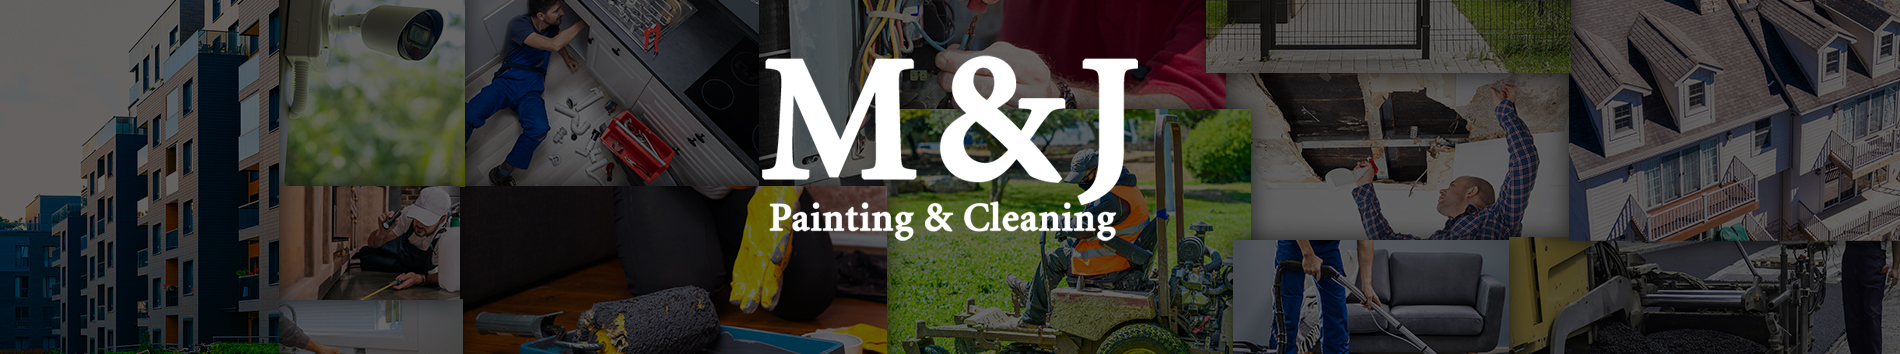 M & J Painting & Cleaning